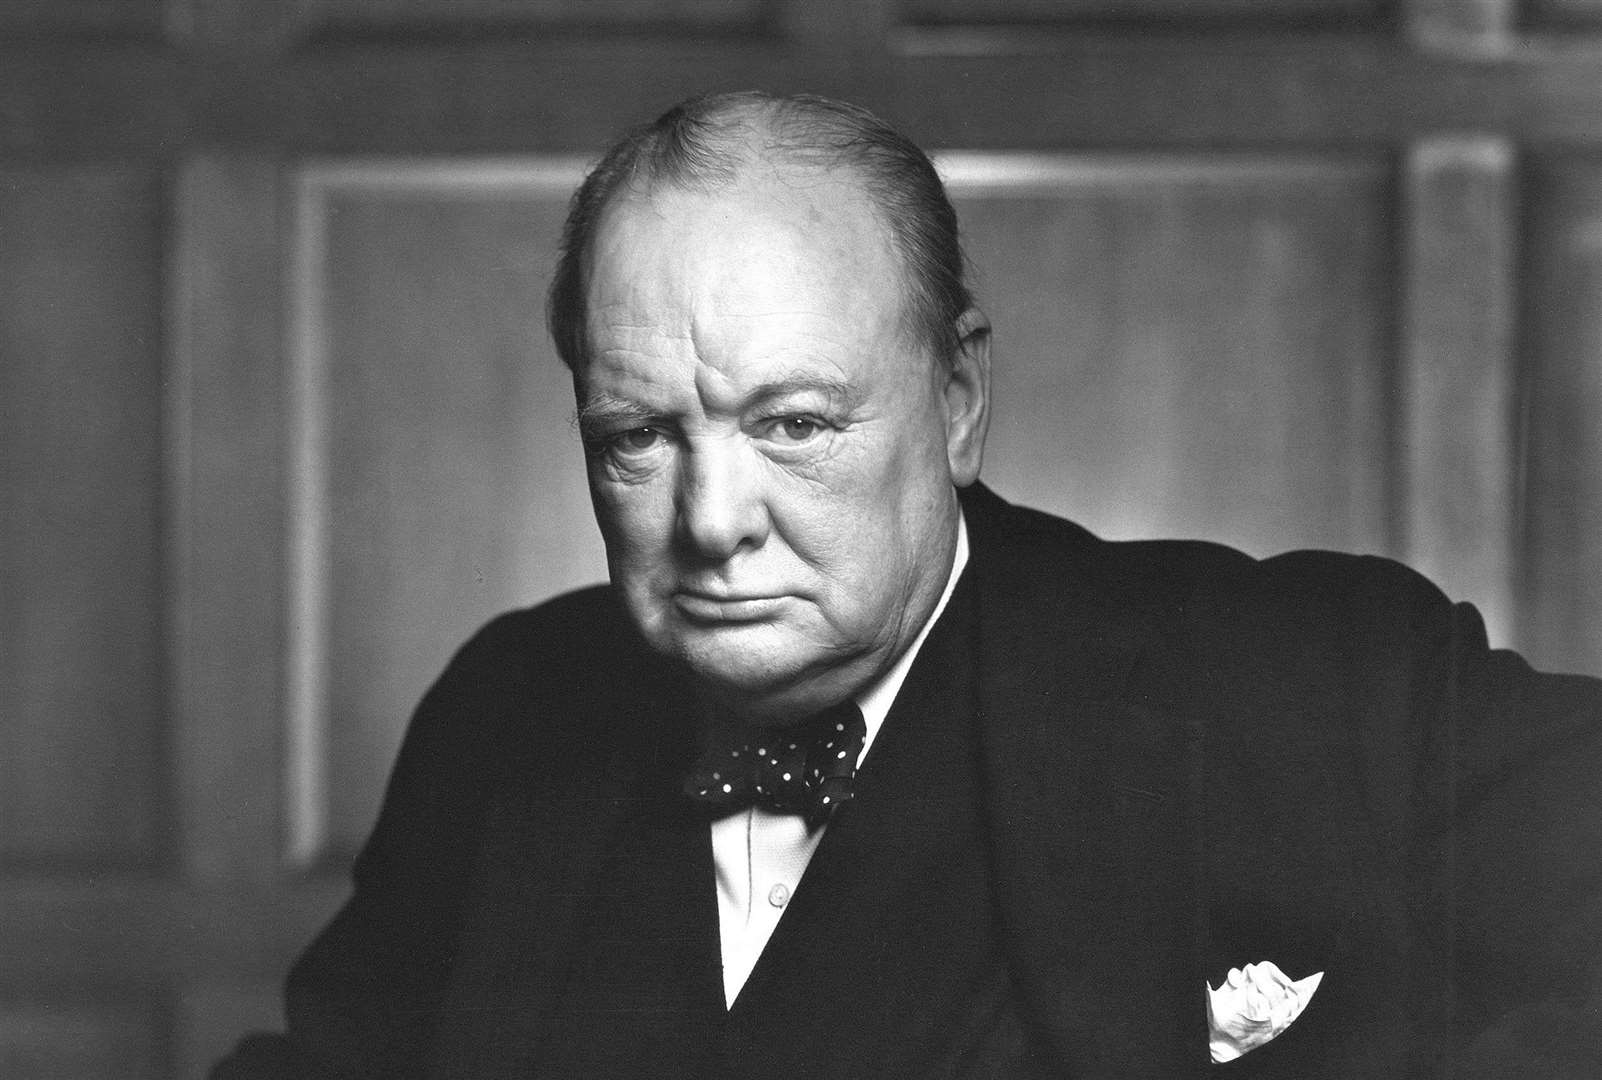 Winston Churchill in December 1941 - the iconic wartime leader who lived in the county for many years